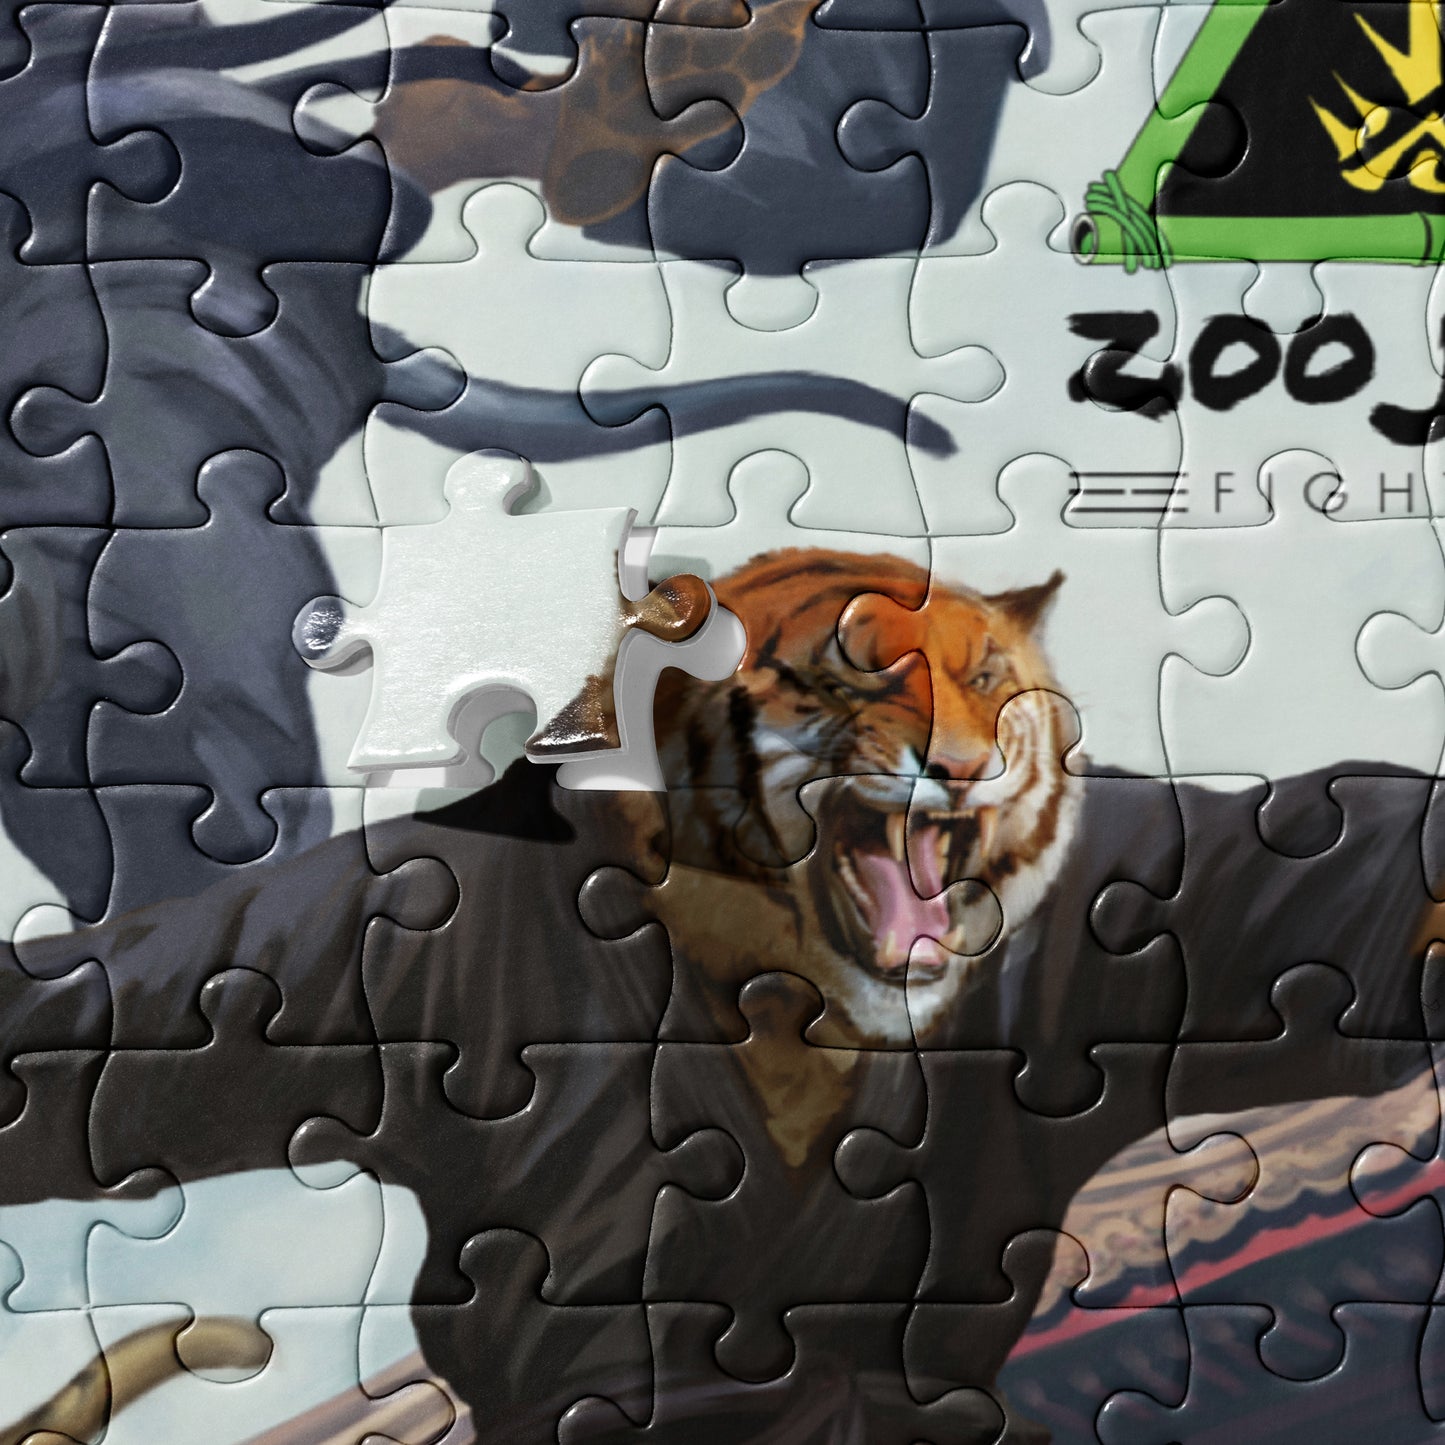 Zoo Jitsu Fighters CLAWS Characters Jigsaw Puzzle - Icon Heroes 